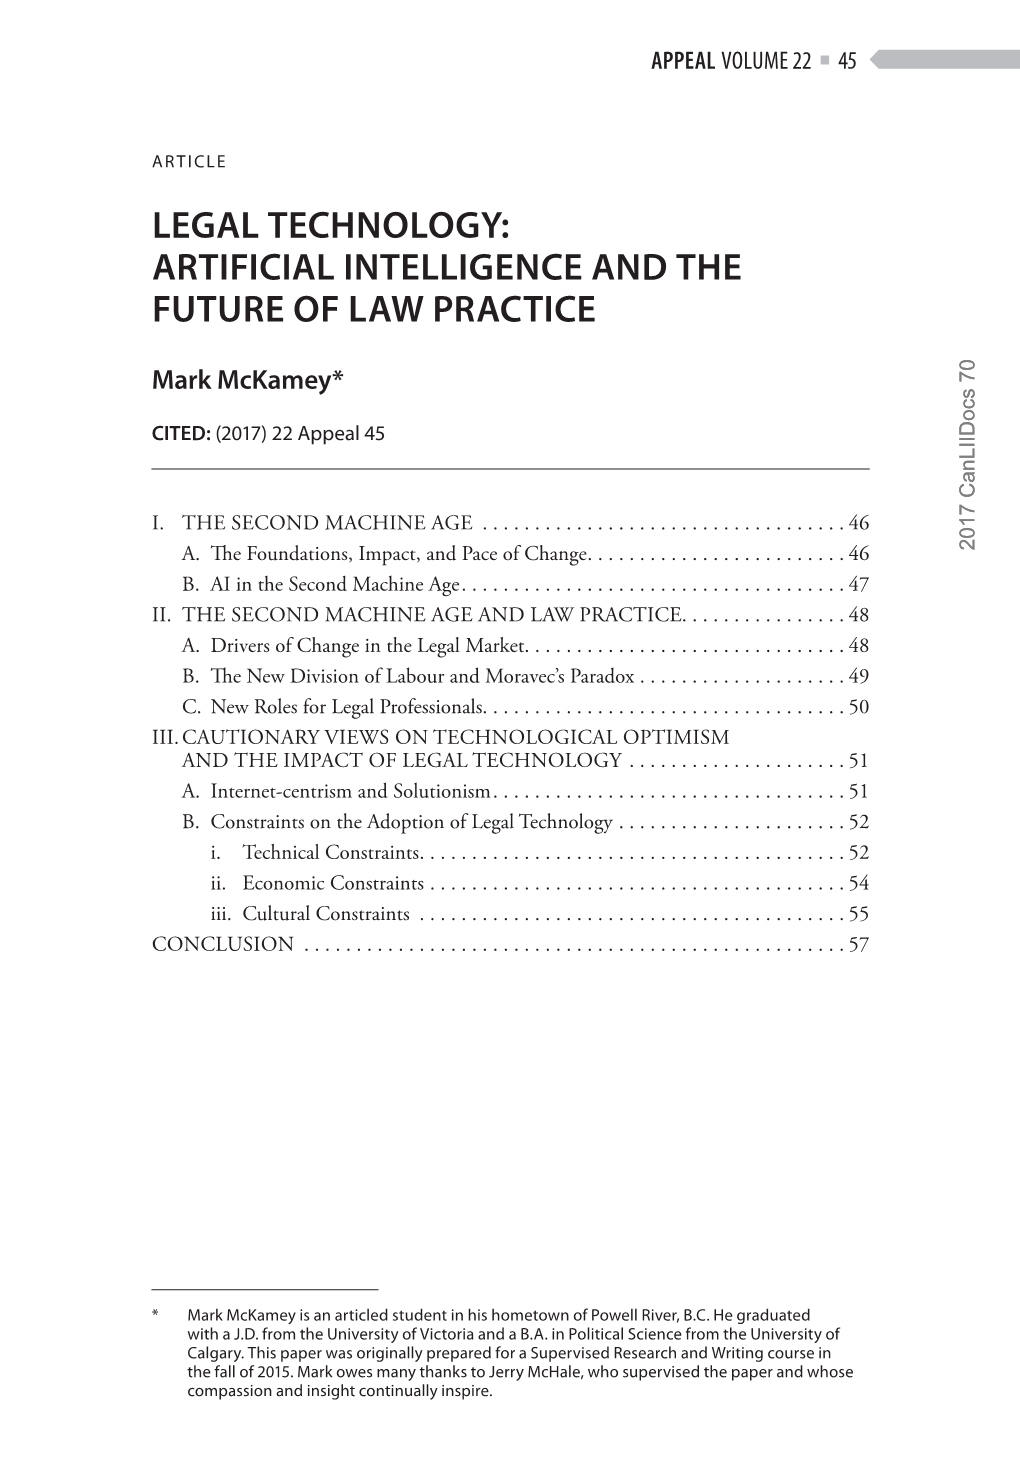 Legal Technology: Artificial Intelligence and the Future of Law Practice